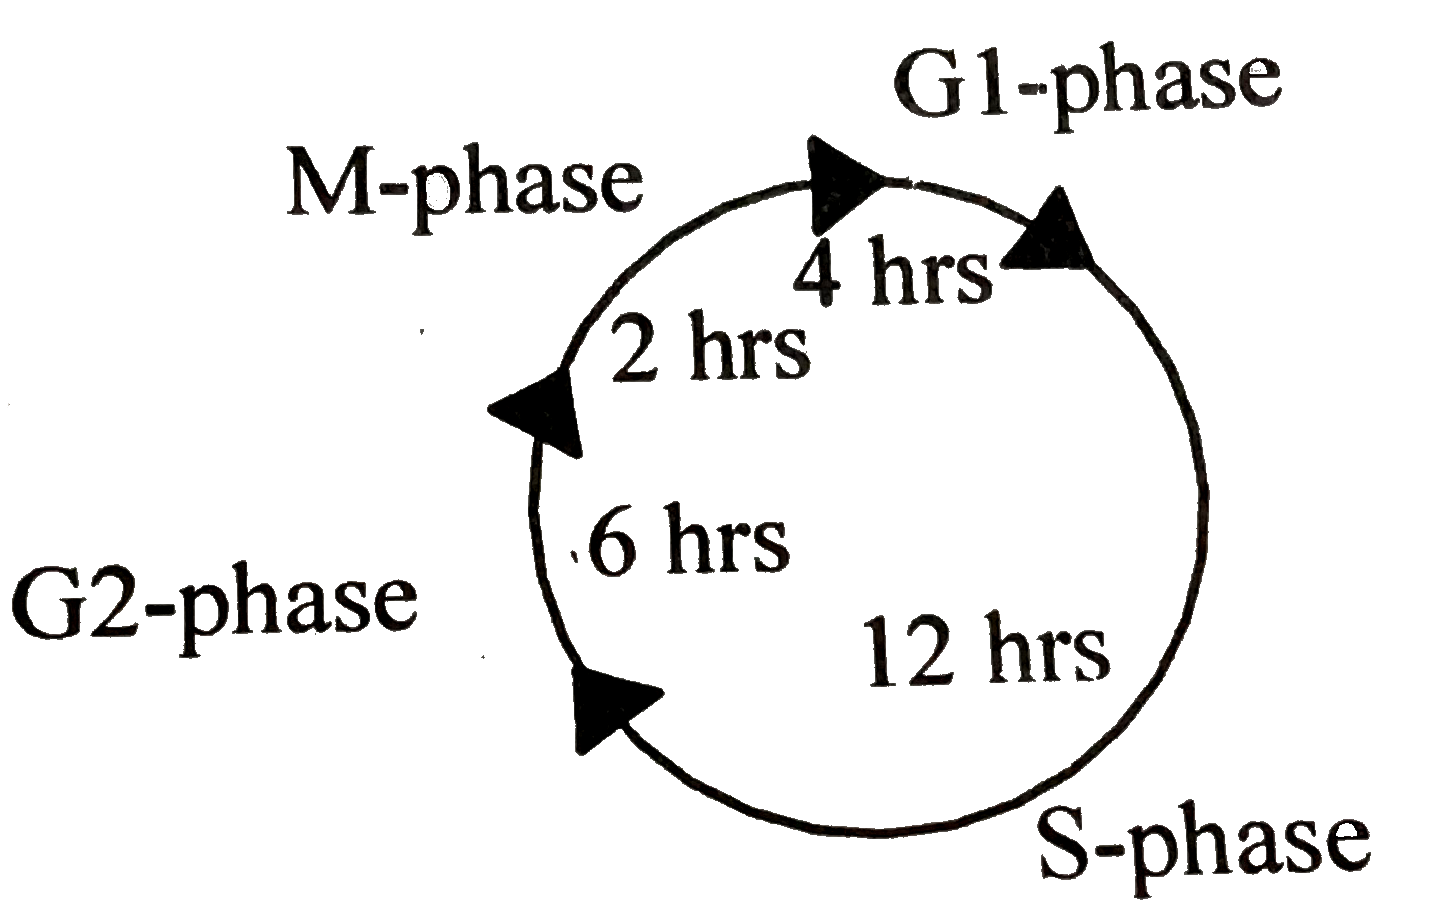 Following the cell cycle scheme given below, what is the probaility that a cell would  be in M-phase at  any given time ?